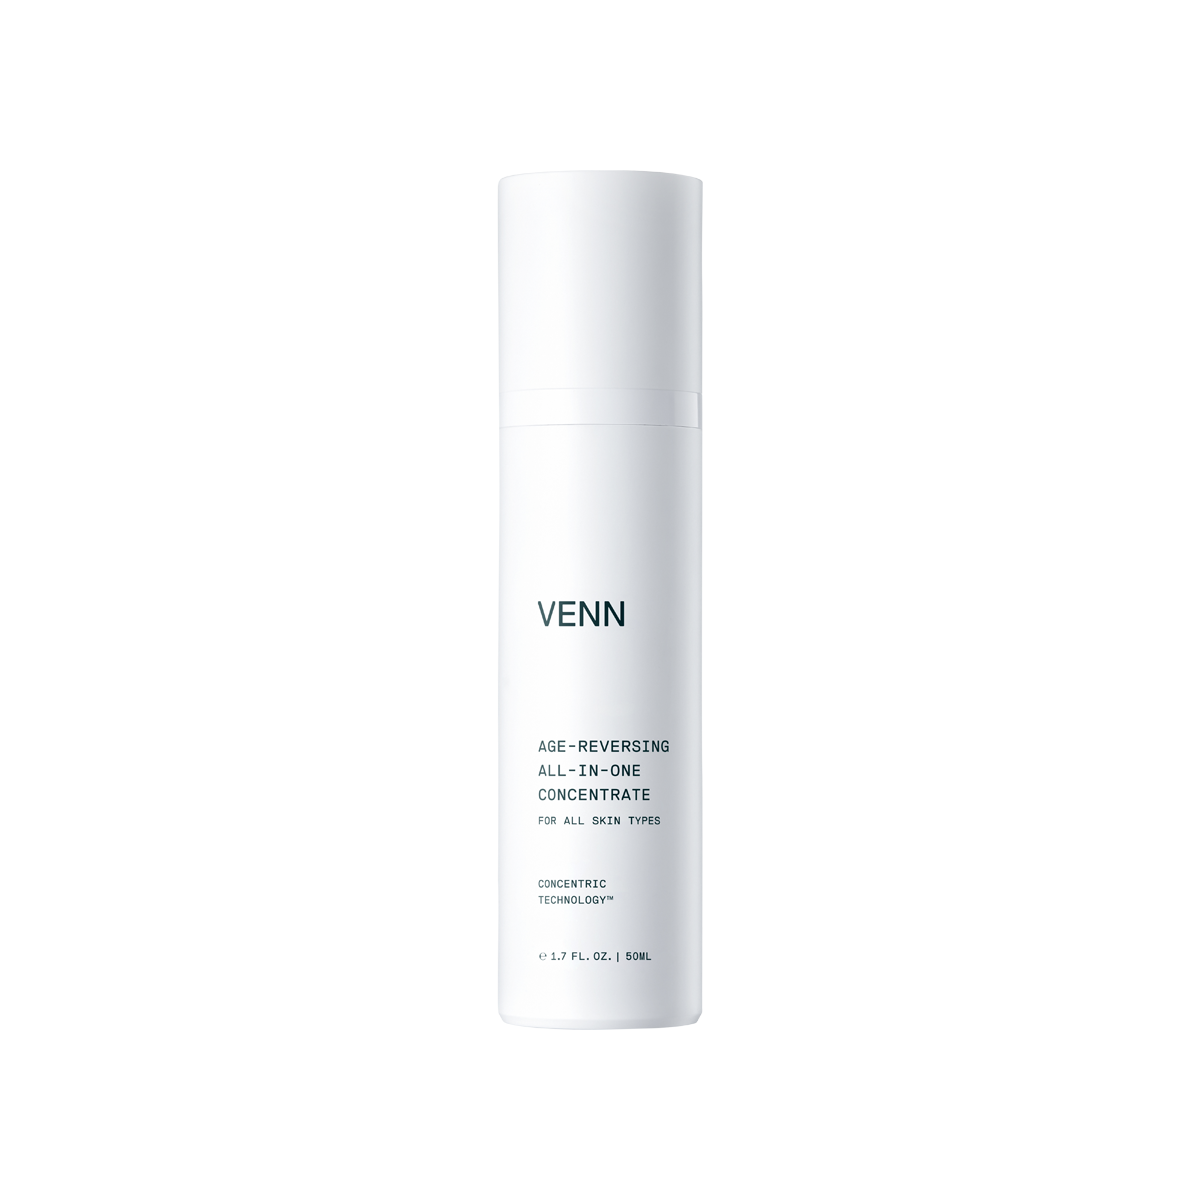 VENN - Age-Reversing All-In-One Concentrate